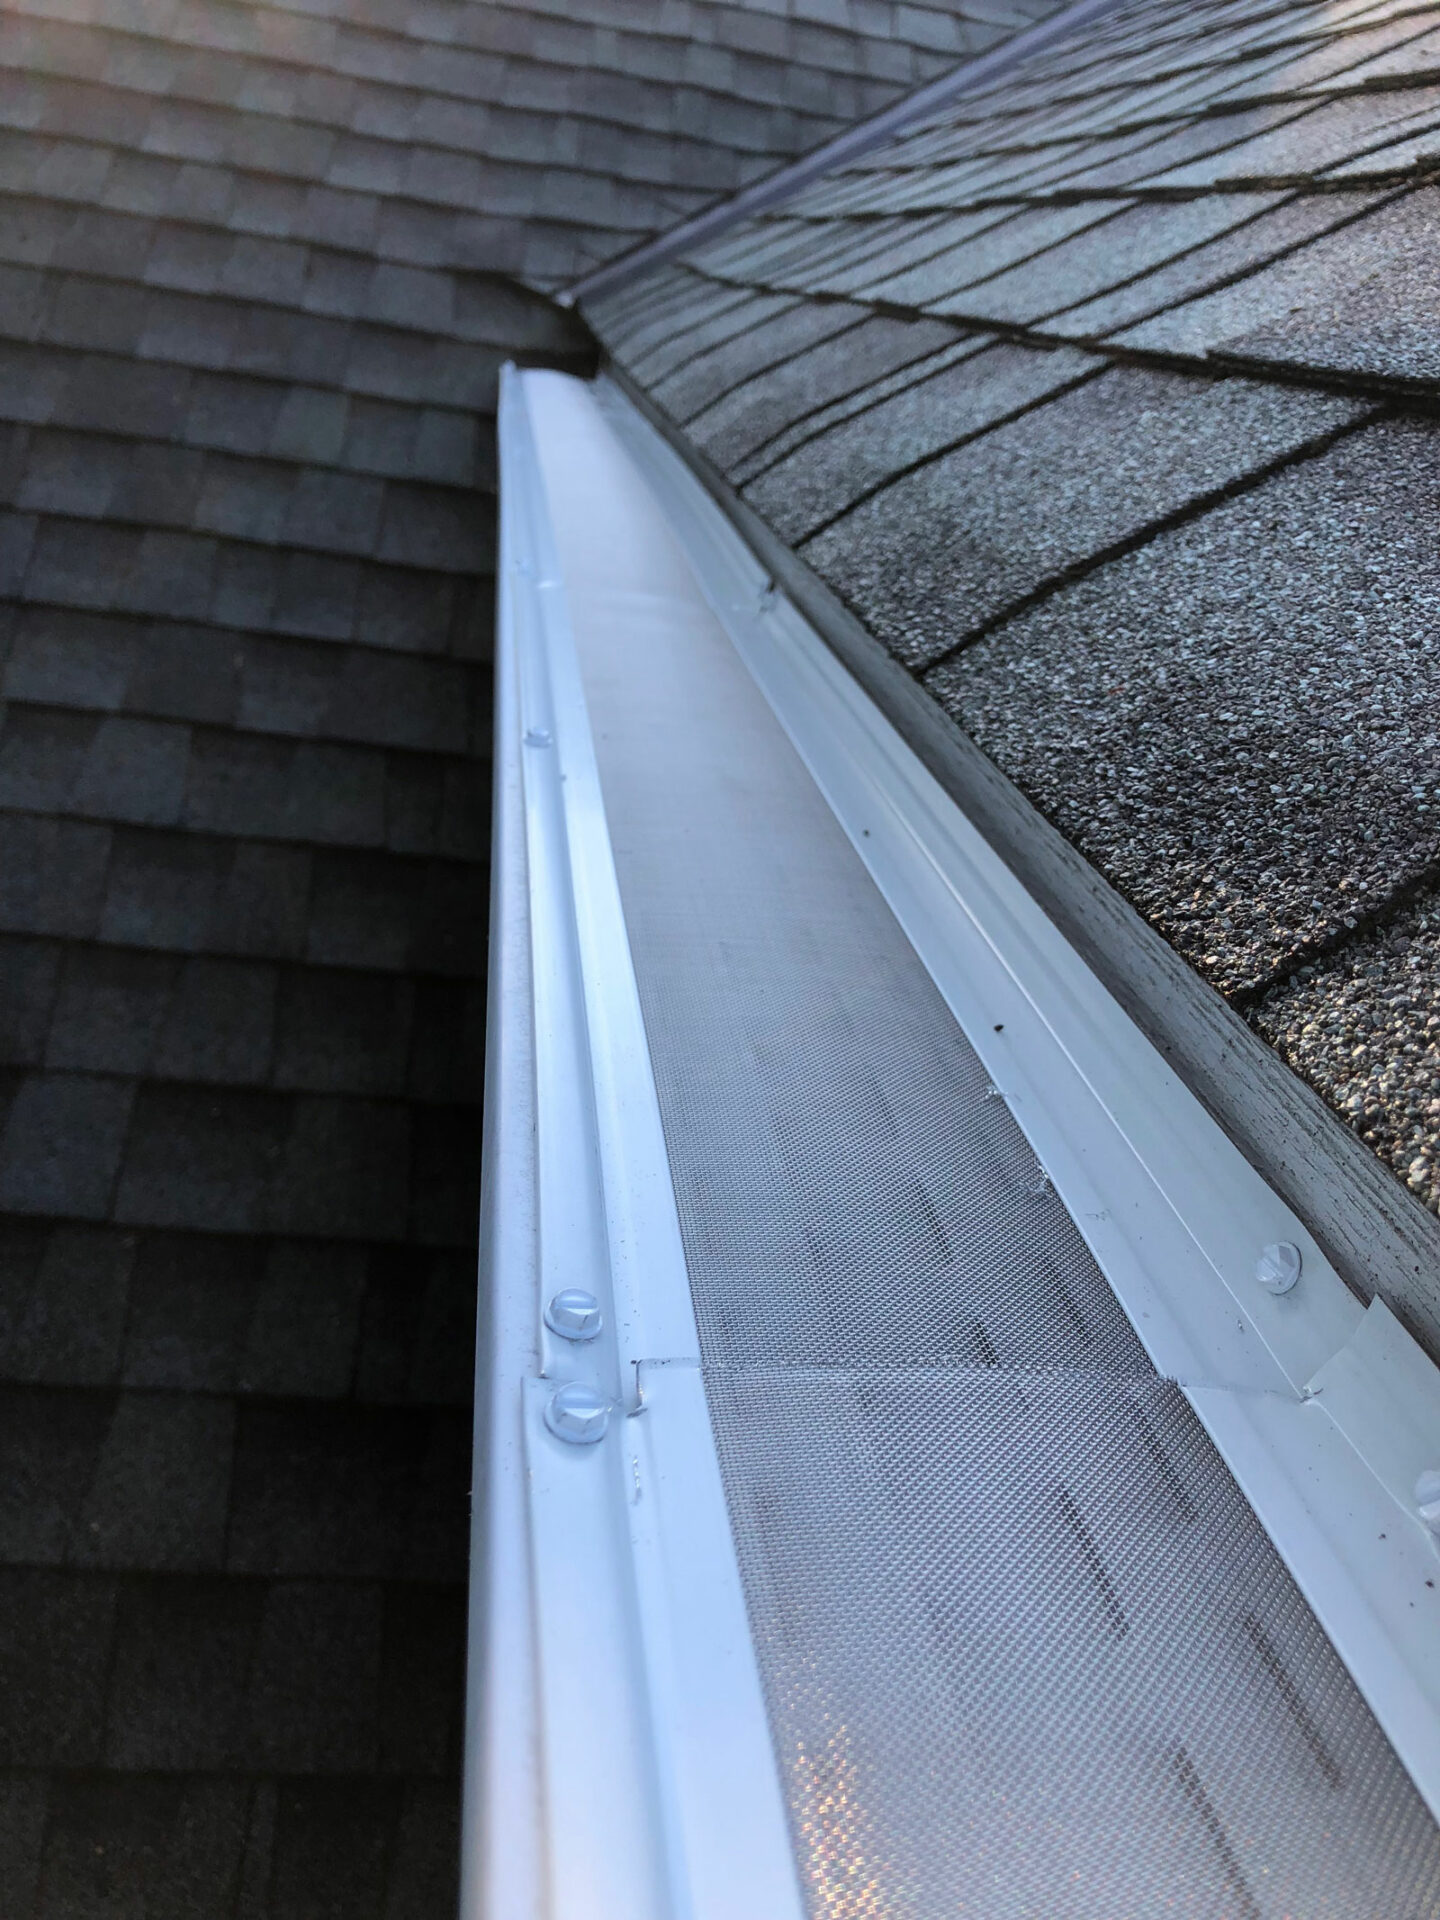 Moss coated roof prior to a professional cleaning service in Washington State